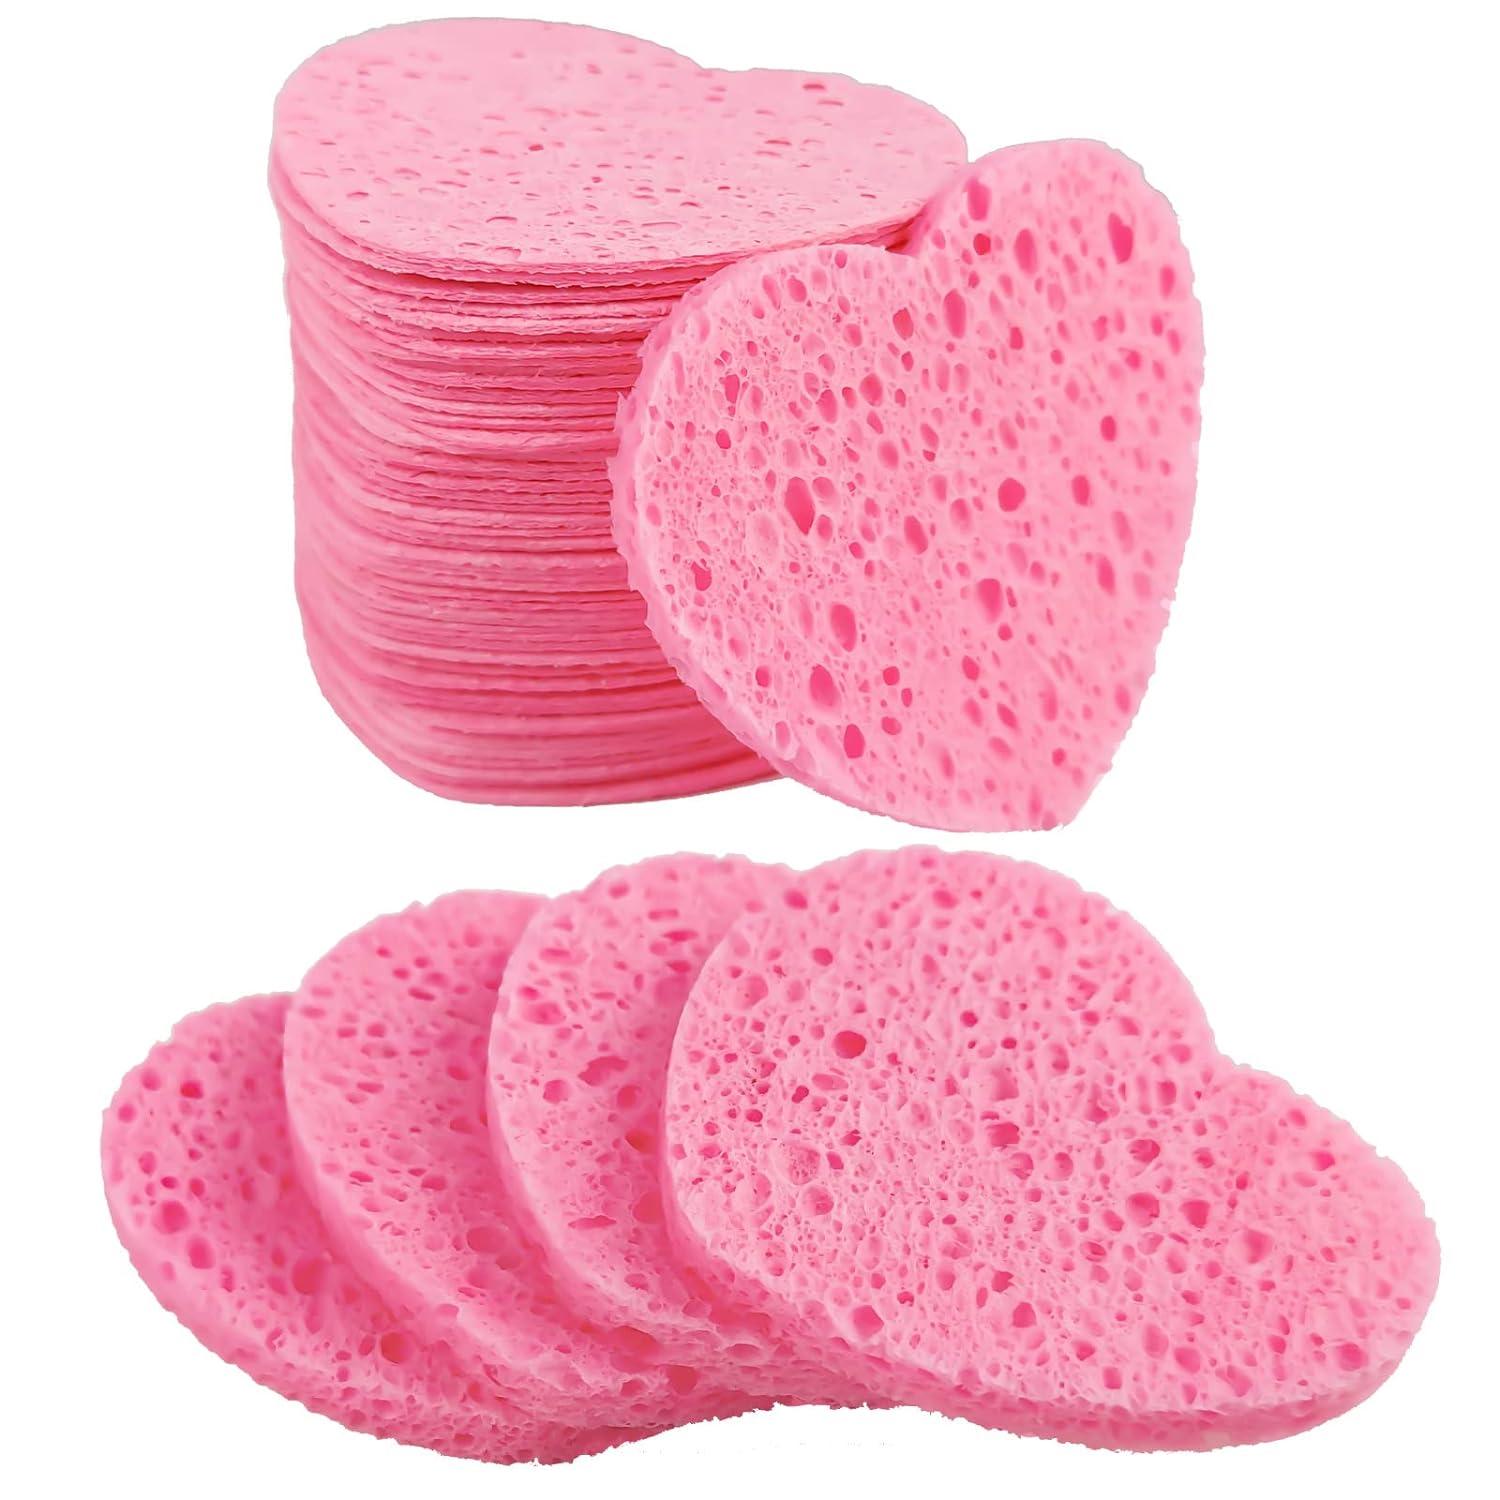 55 Pieces Compressed Facial Sponges for Estheticians, Pink Heart Face  Sponges for Cleansing and Exfoliating Natural Reusable Sponges for Facials  with Storage Co…